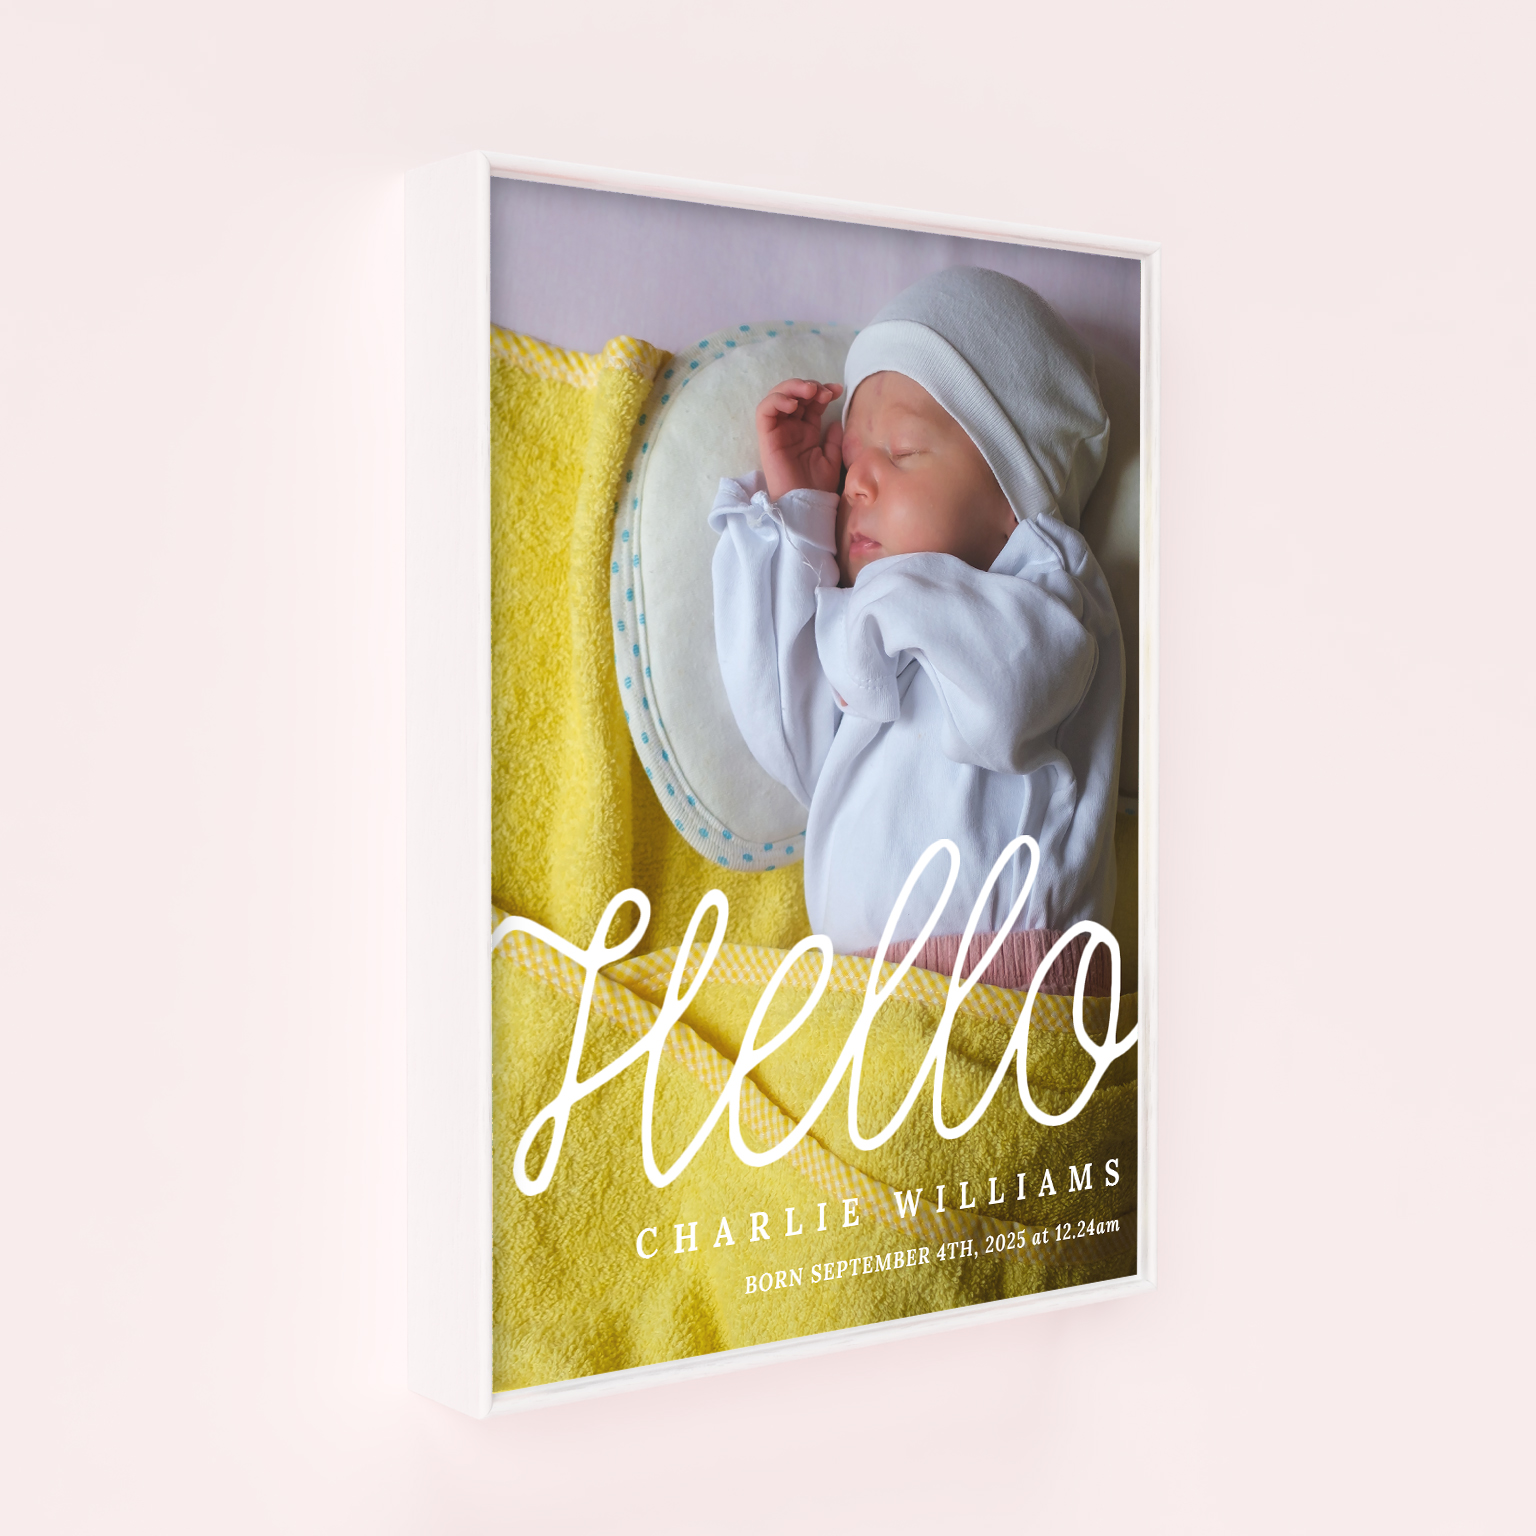  Personalised Framed Photo Canvas withHello from me Design - A charming portrait-oriented canvas to showcase and cherish your memories, crafted with high-quality materials for lasting enjoyment.